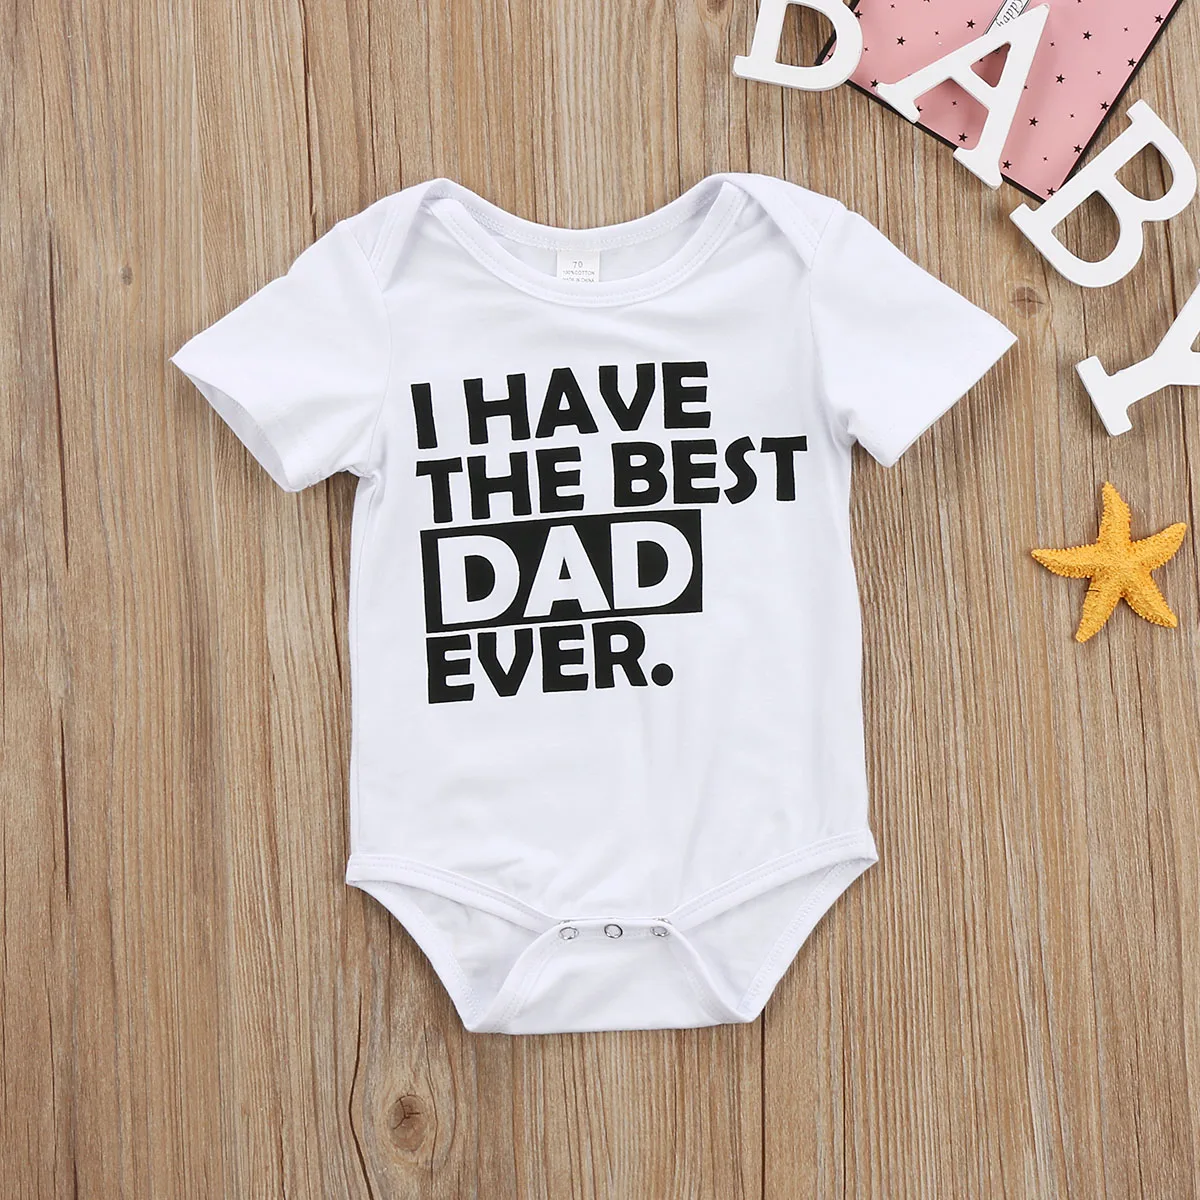 Dad Ever Dad Fathers Day1 Infant Baby Boys Girls Crawling Suit Sleeveless Romper Bodysuit Onesies Jumpsuit White Best